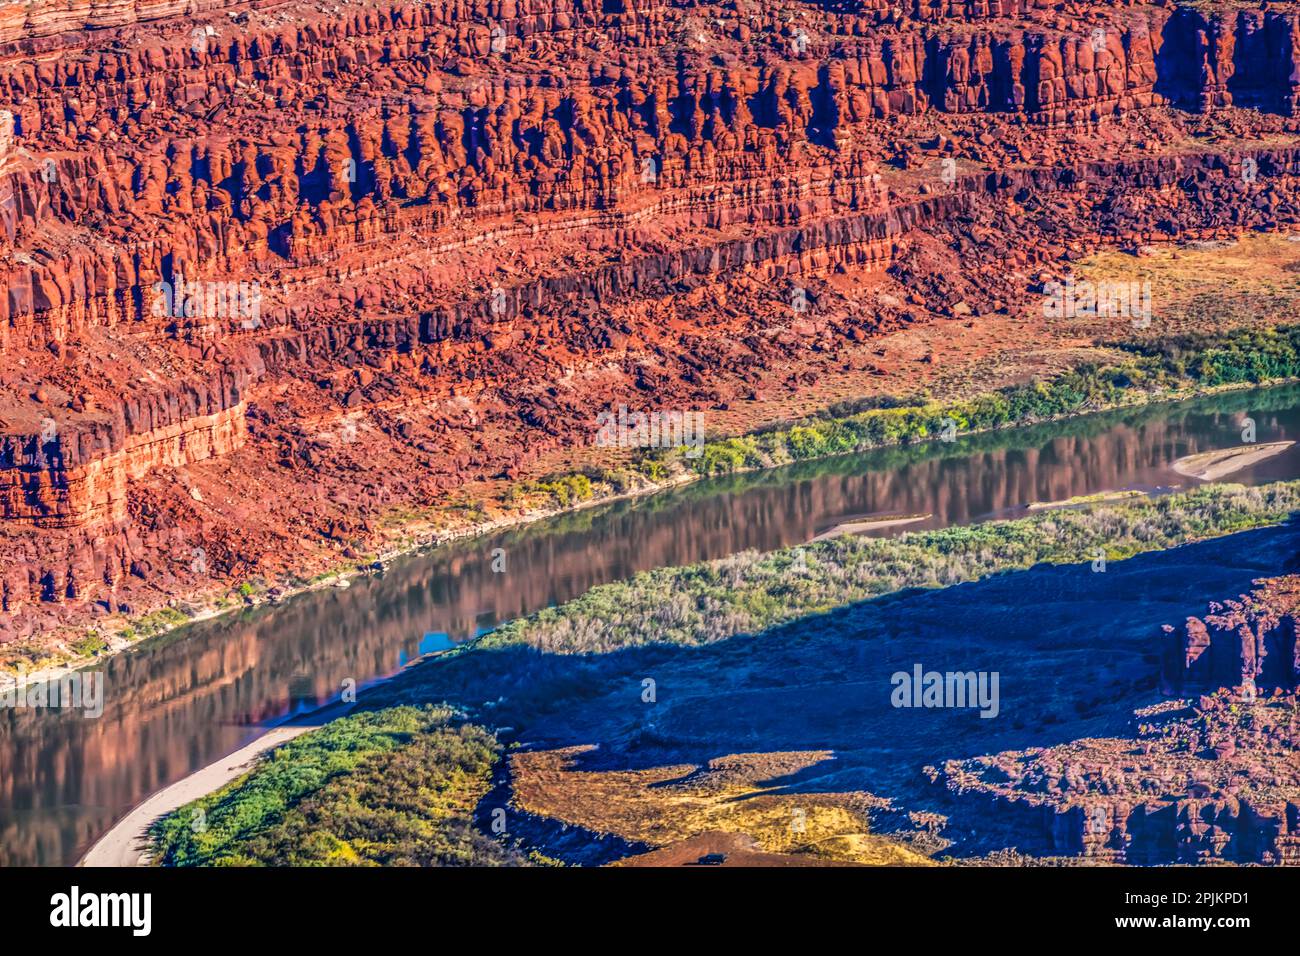 Green River, Grand View Point Overlook, Red Rock Canyons, Canyonlands National Park, Moab, Utah. Stockfoto